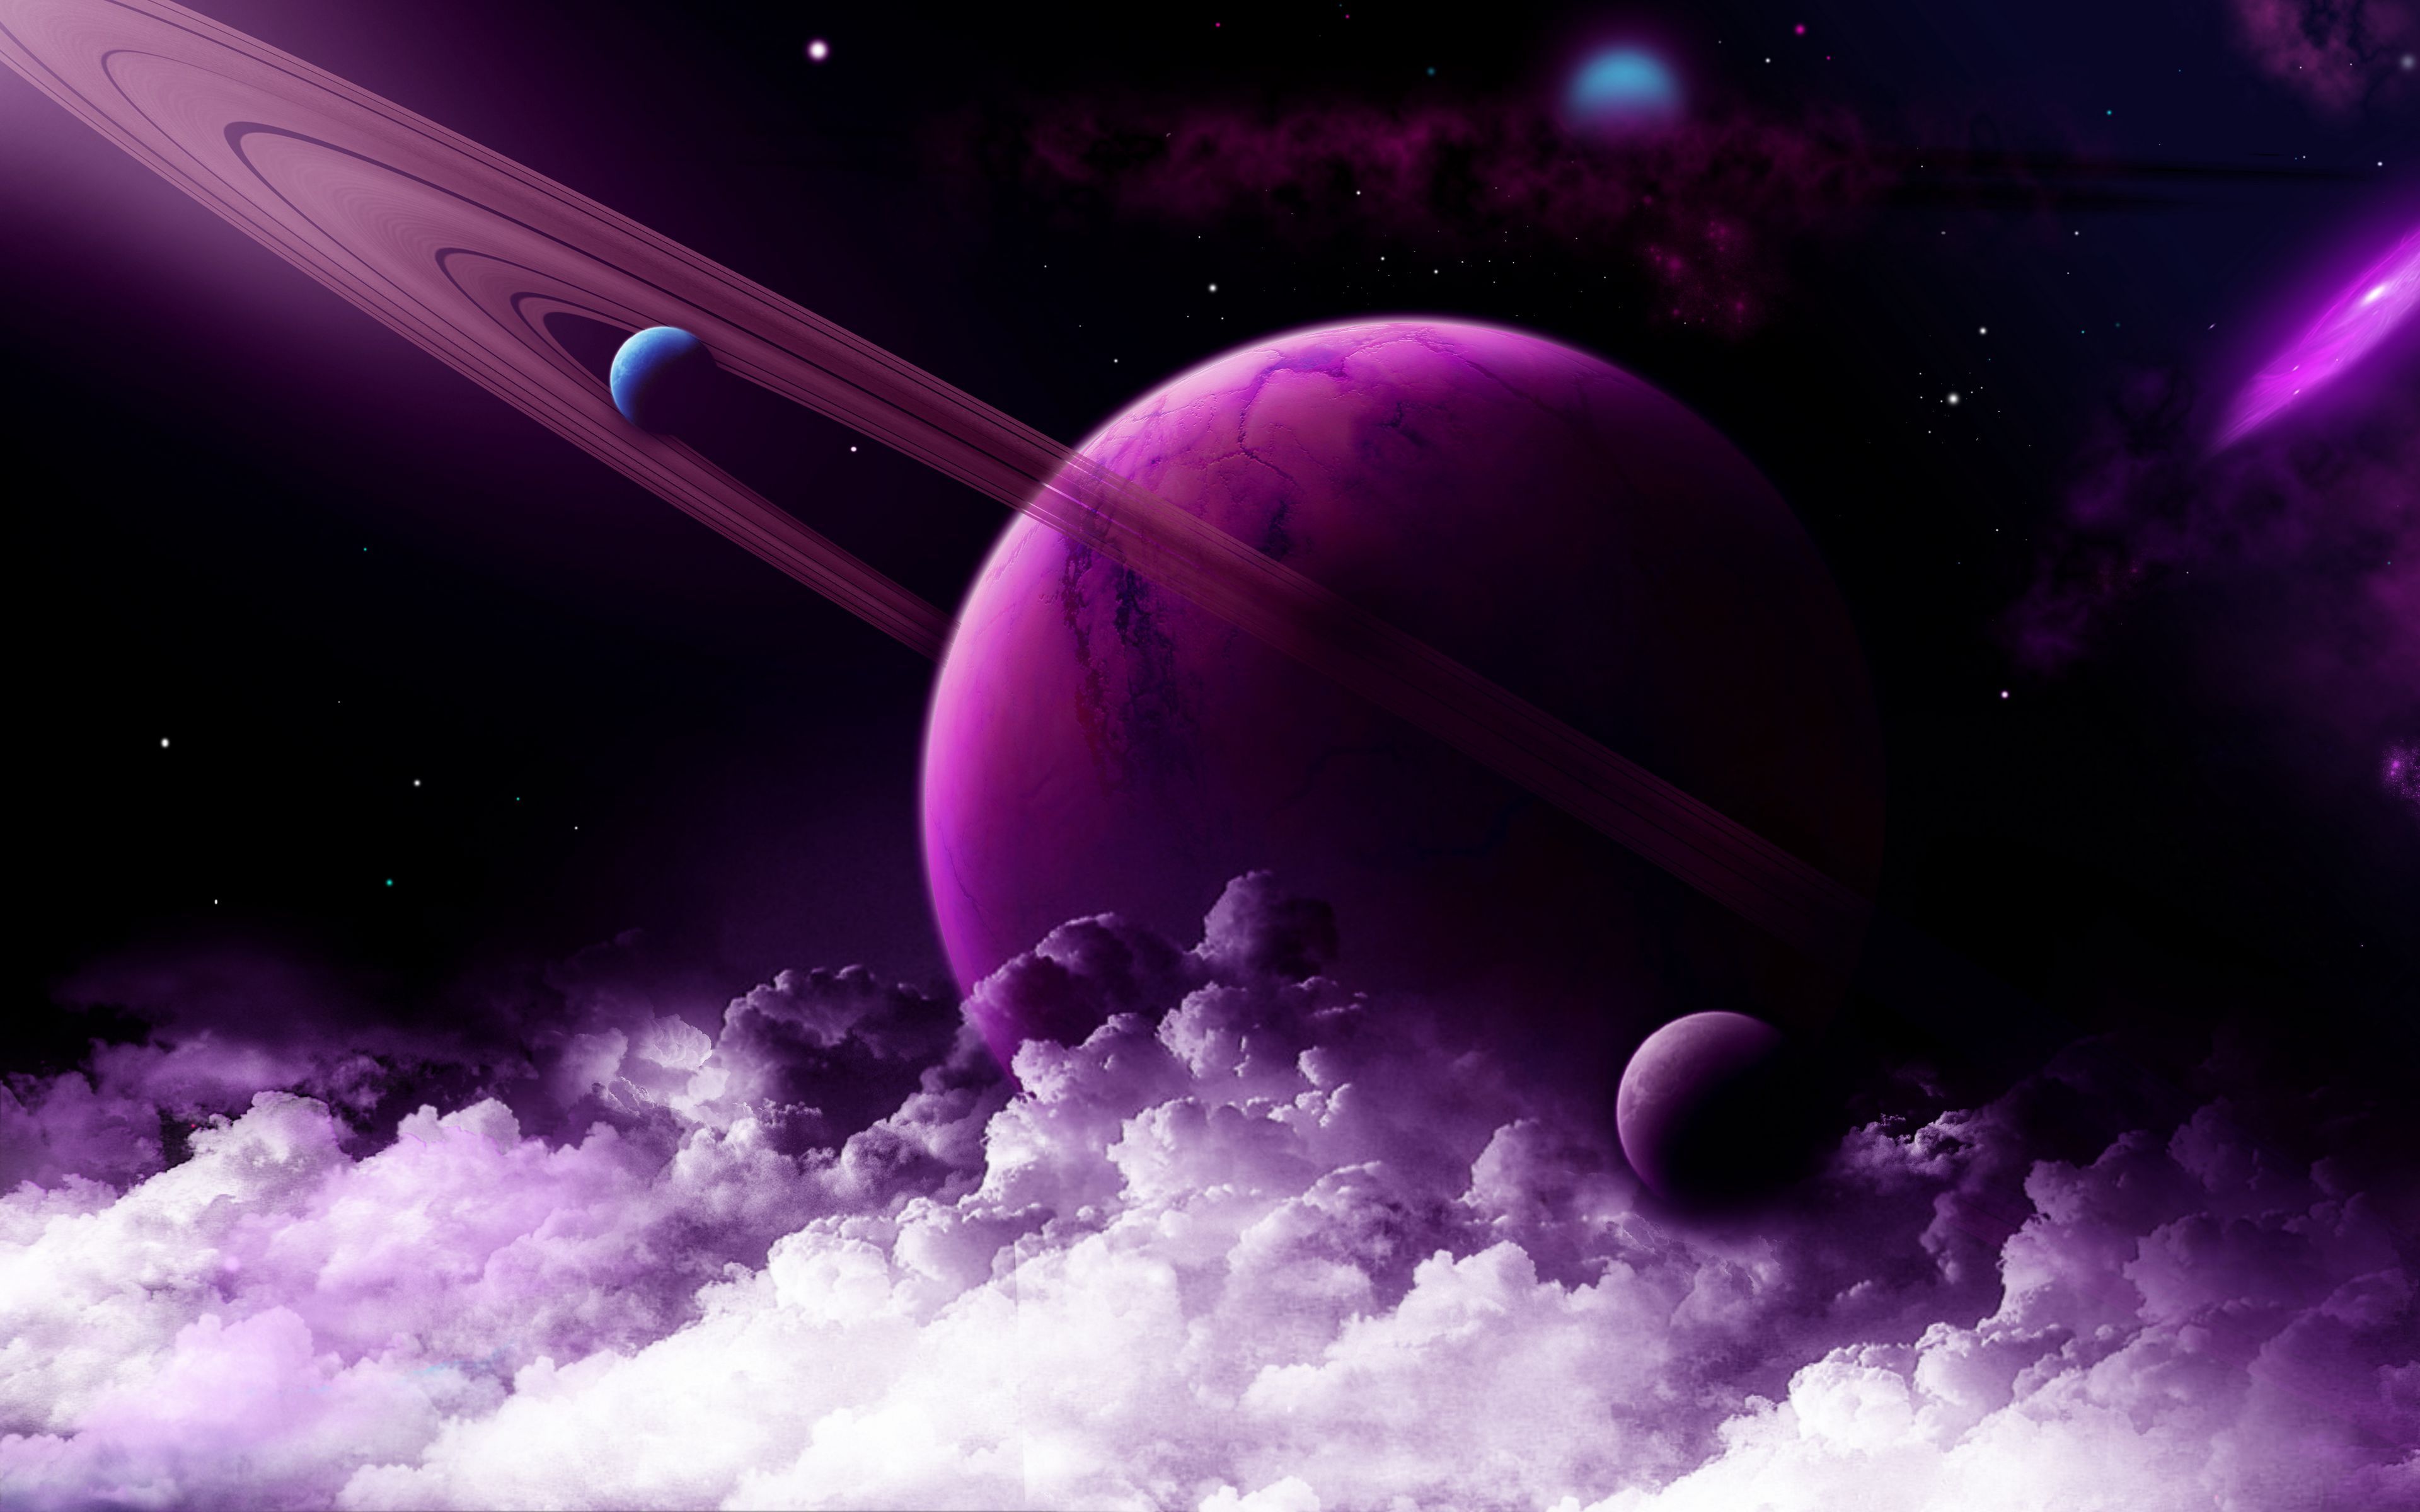 Download wallpaper 3840x2400 planet, ring, purple, clouds, space 4k ultra HD 16:10 HD background